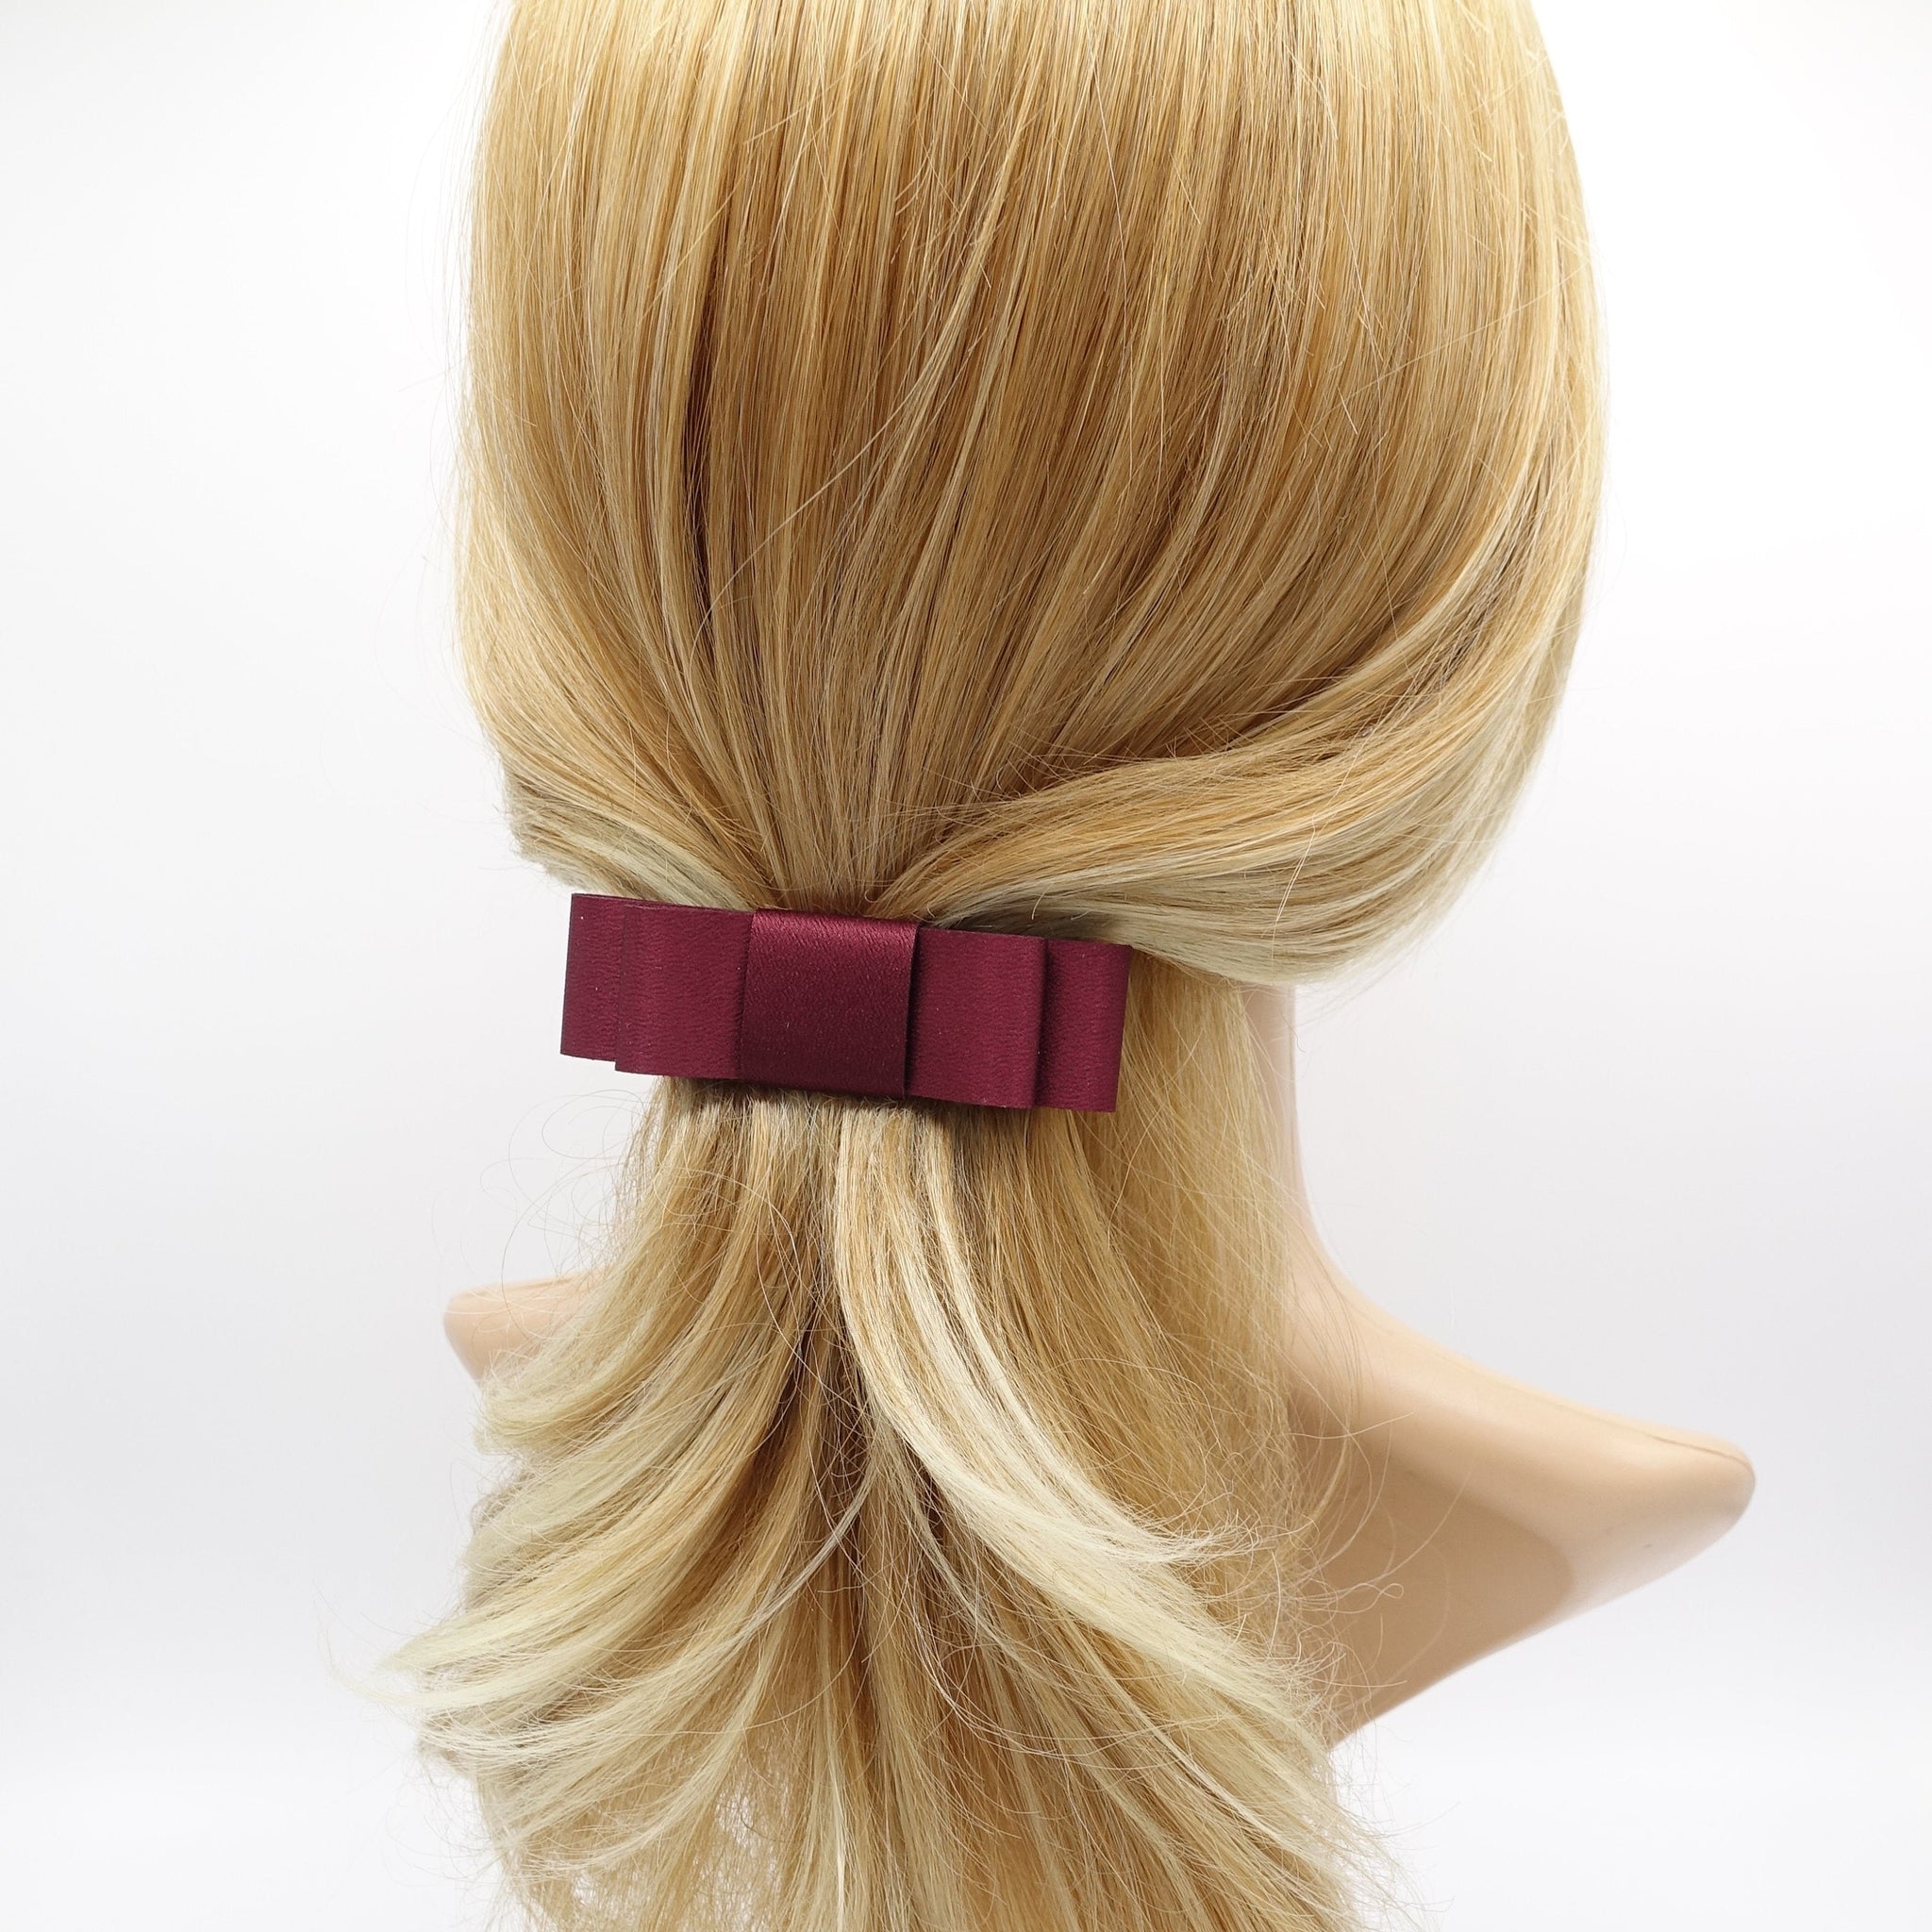 veryshine.com Barrette (Bow) Red wine satin flat hair bow for women